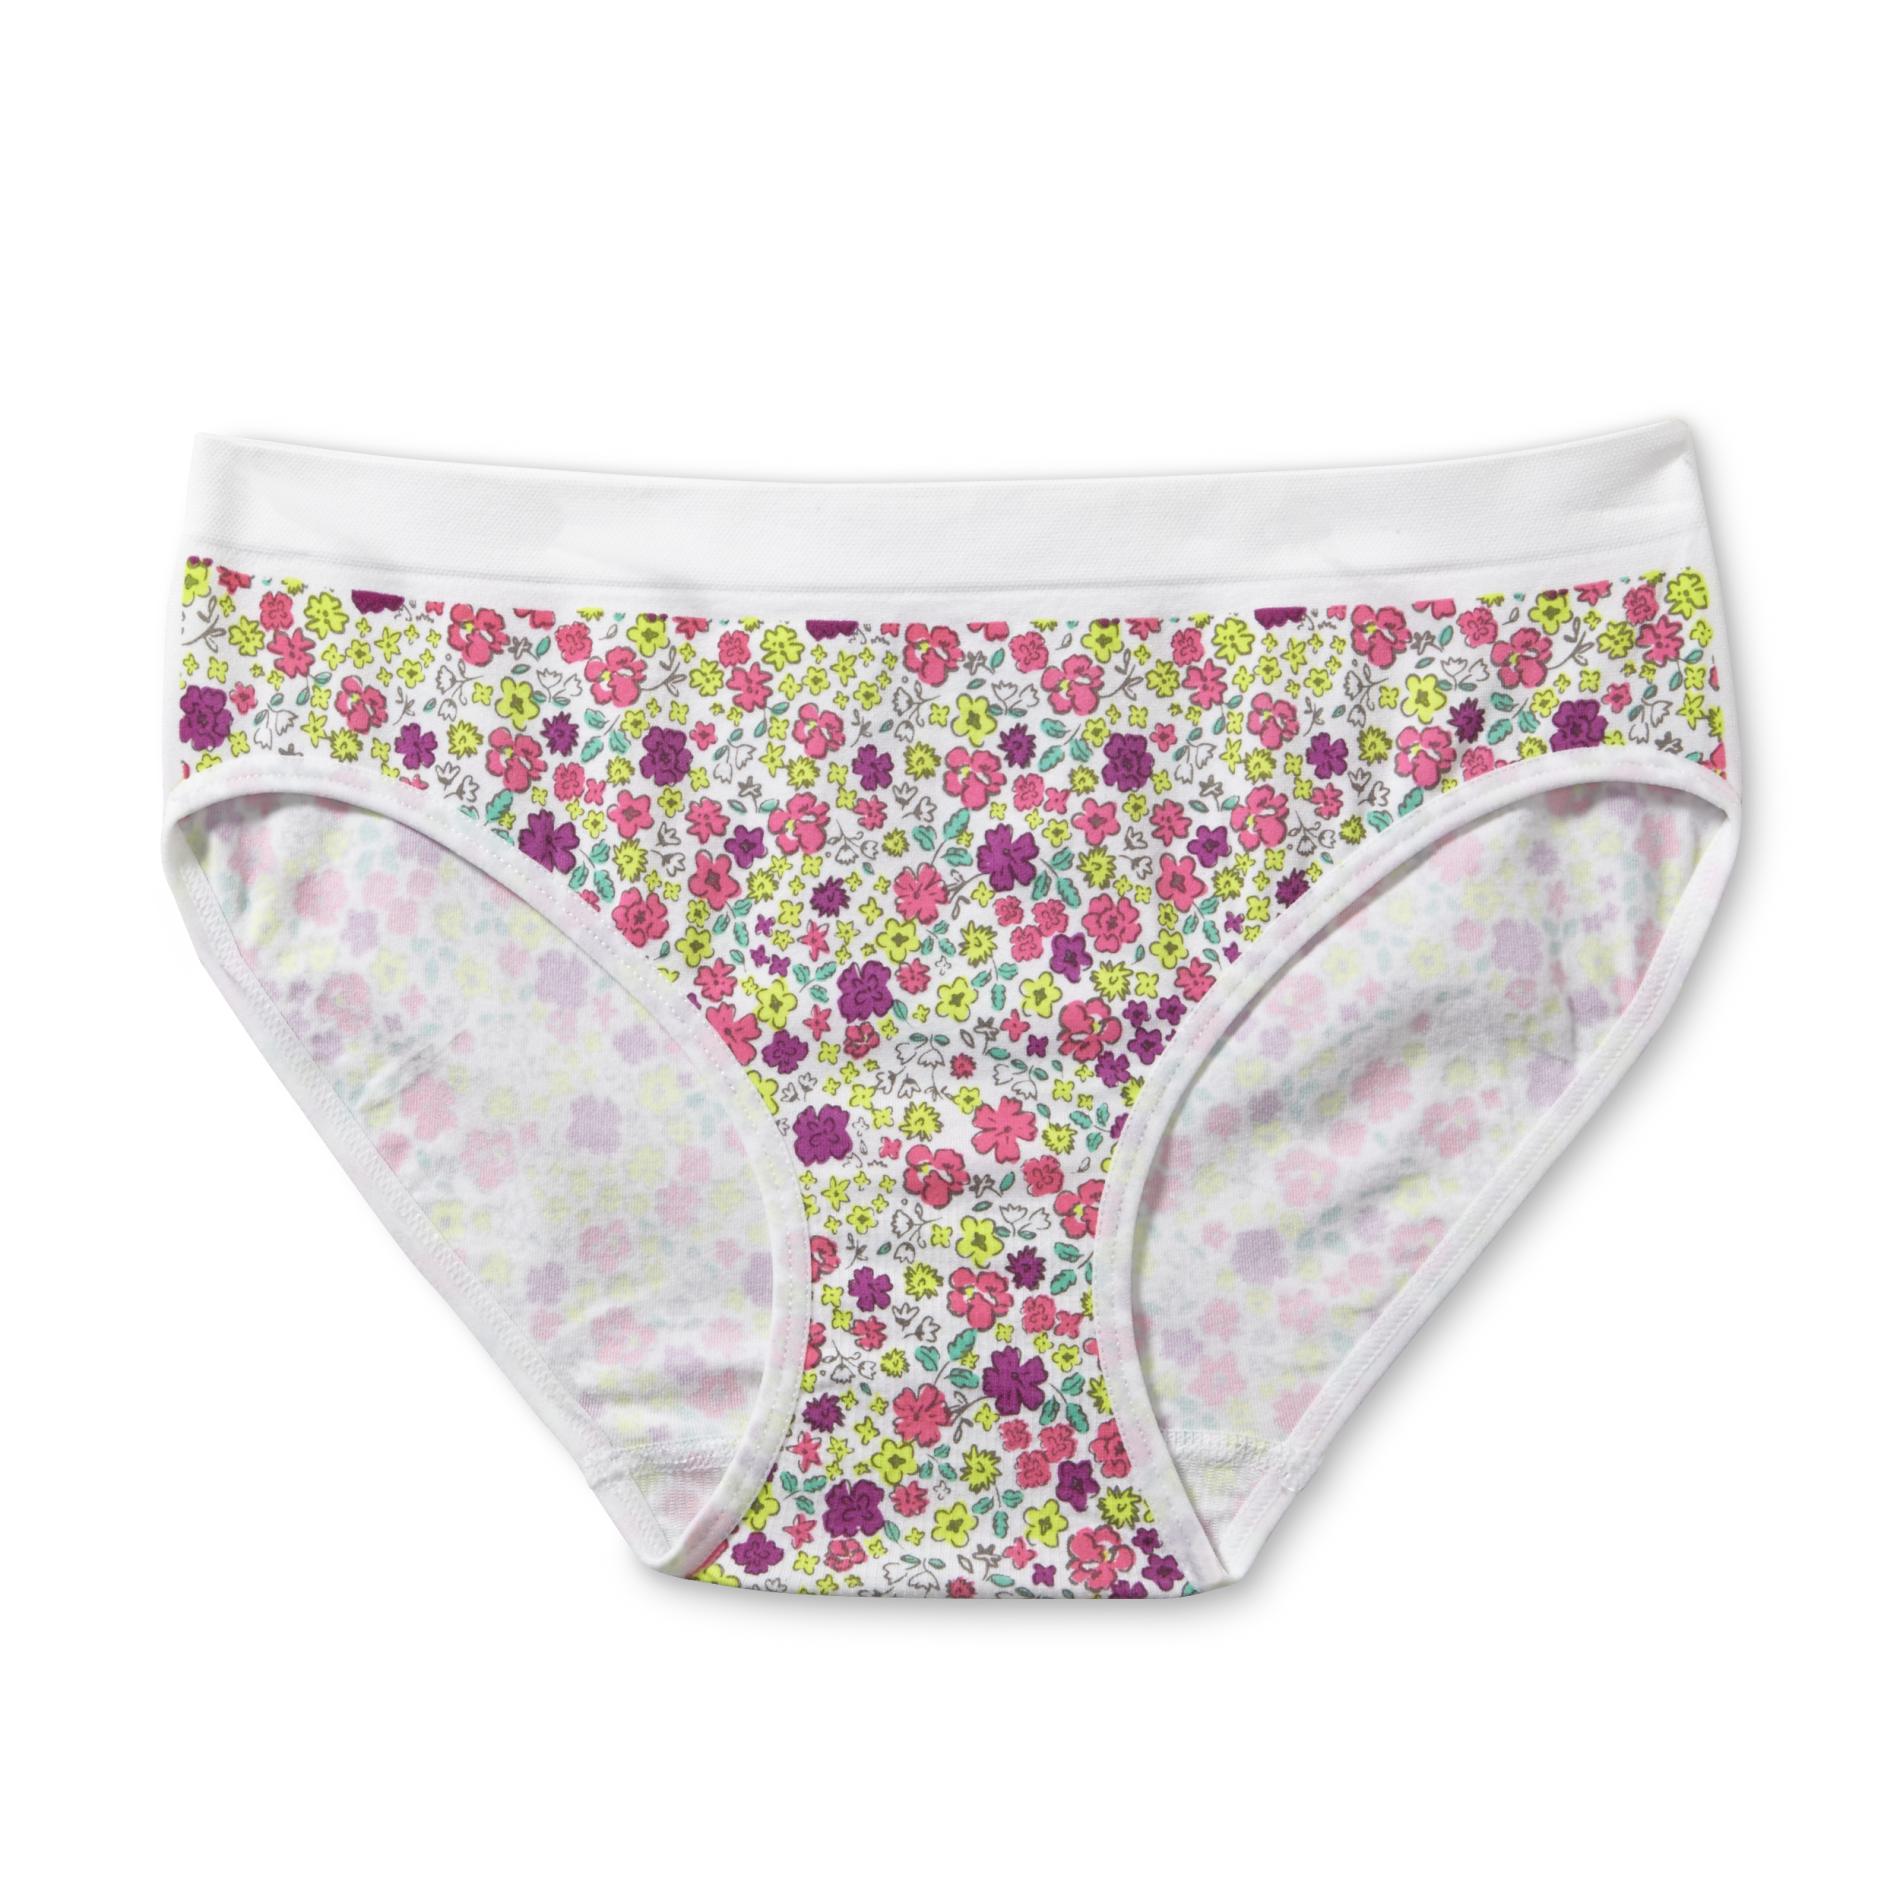 Maidenform Girl's Hipster Panties - Floral Print